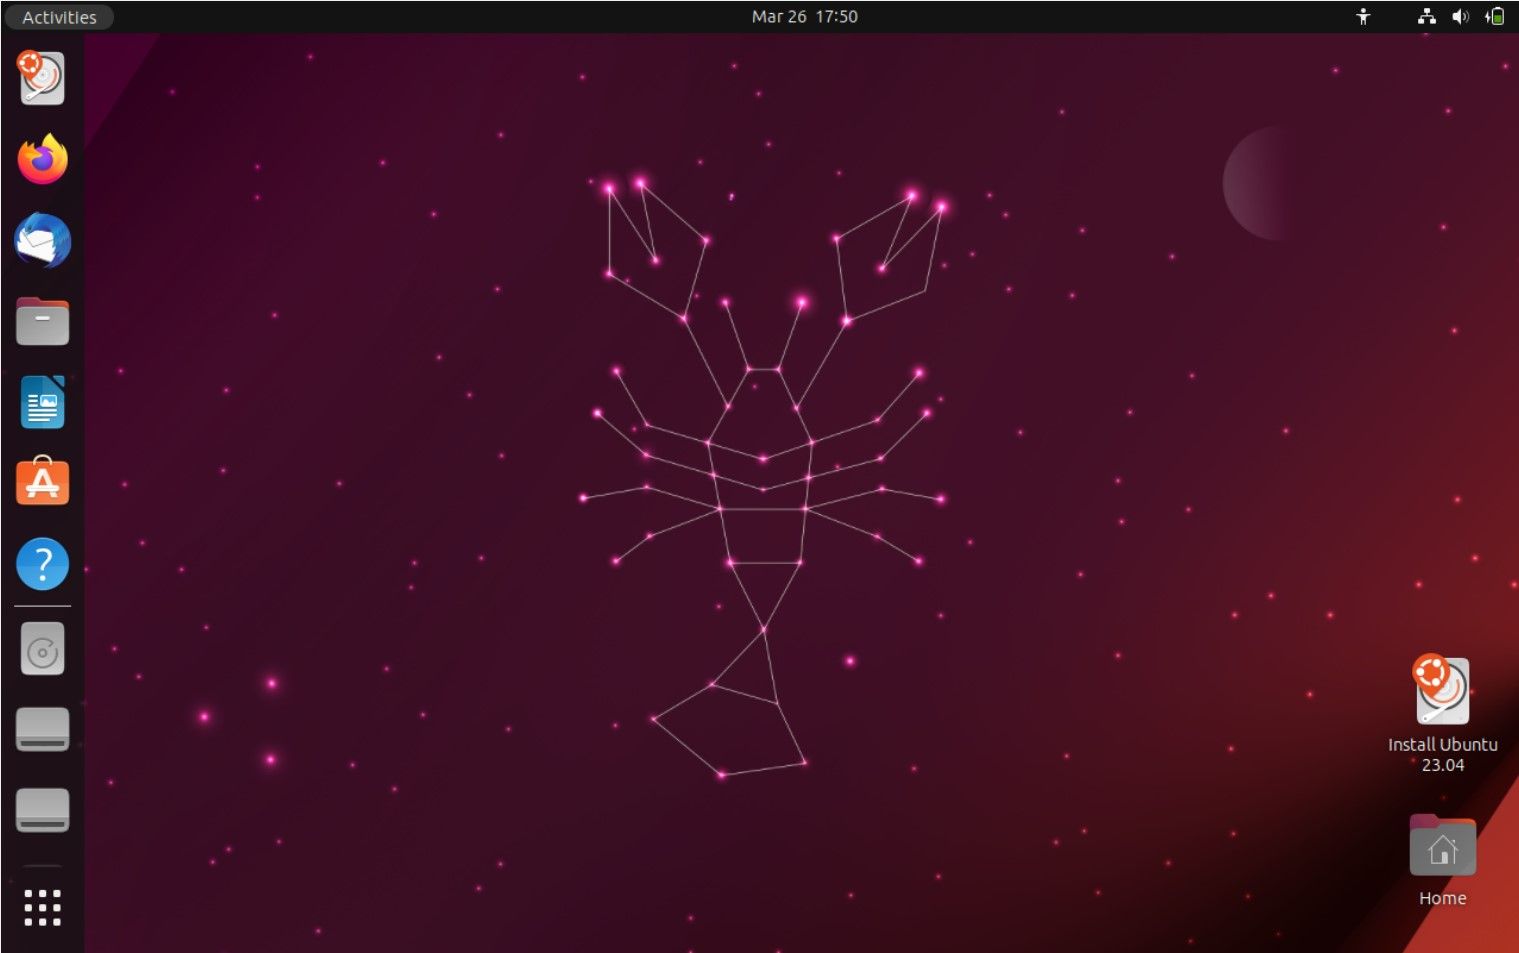 Lobster constellation wallpaper with icons on a Linux screen